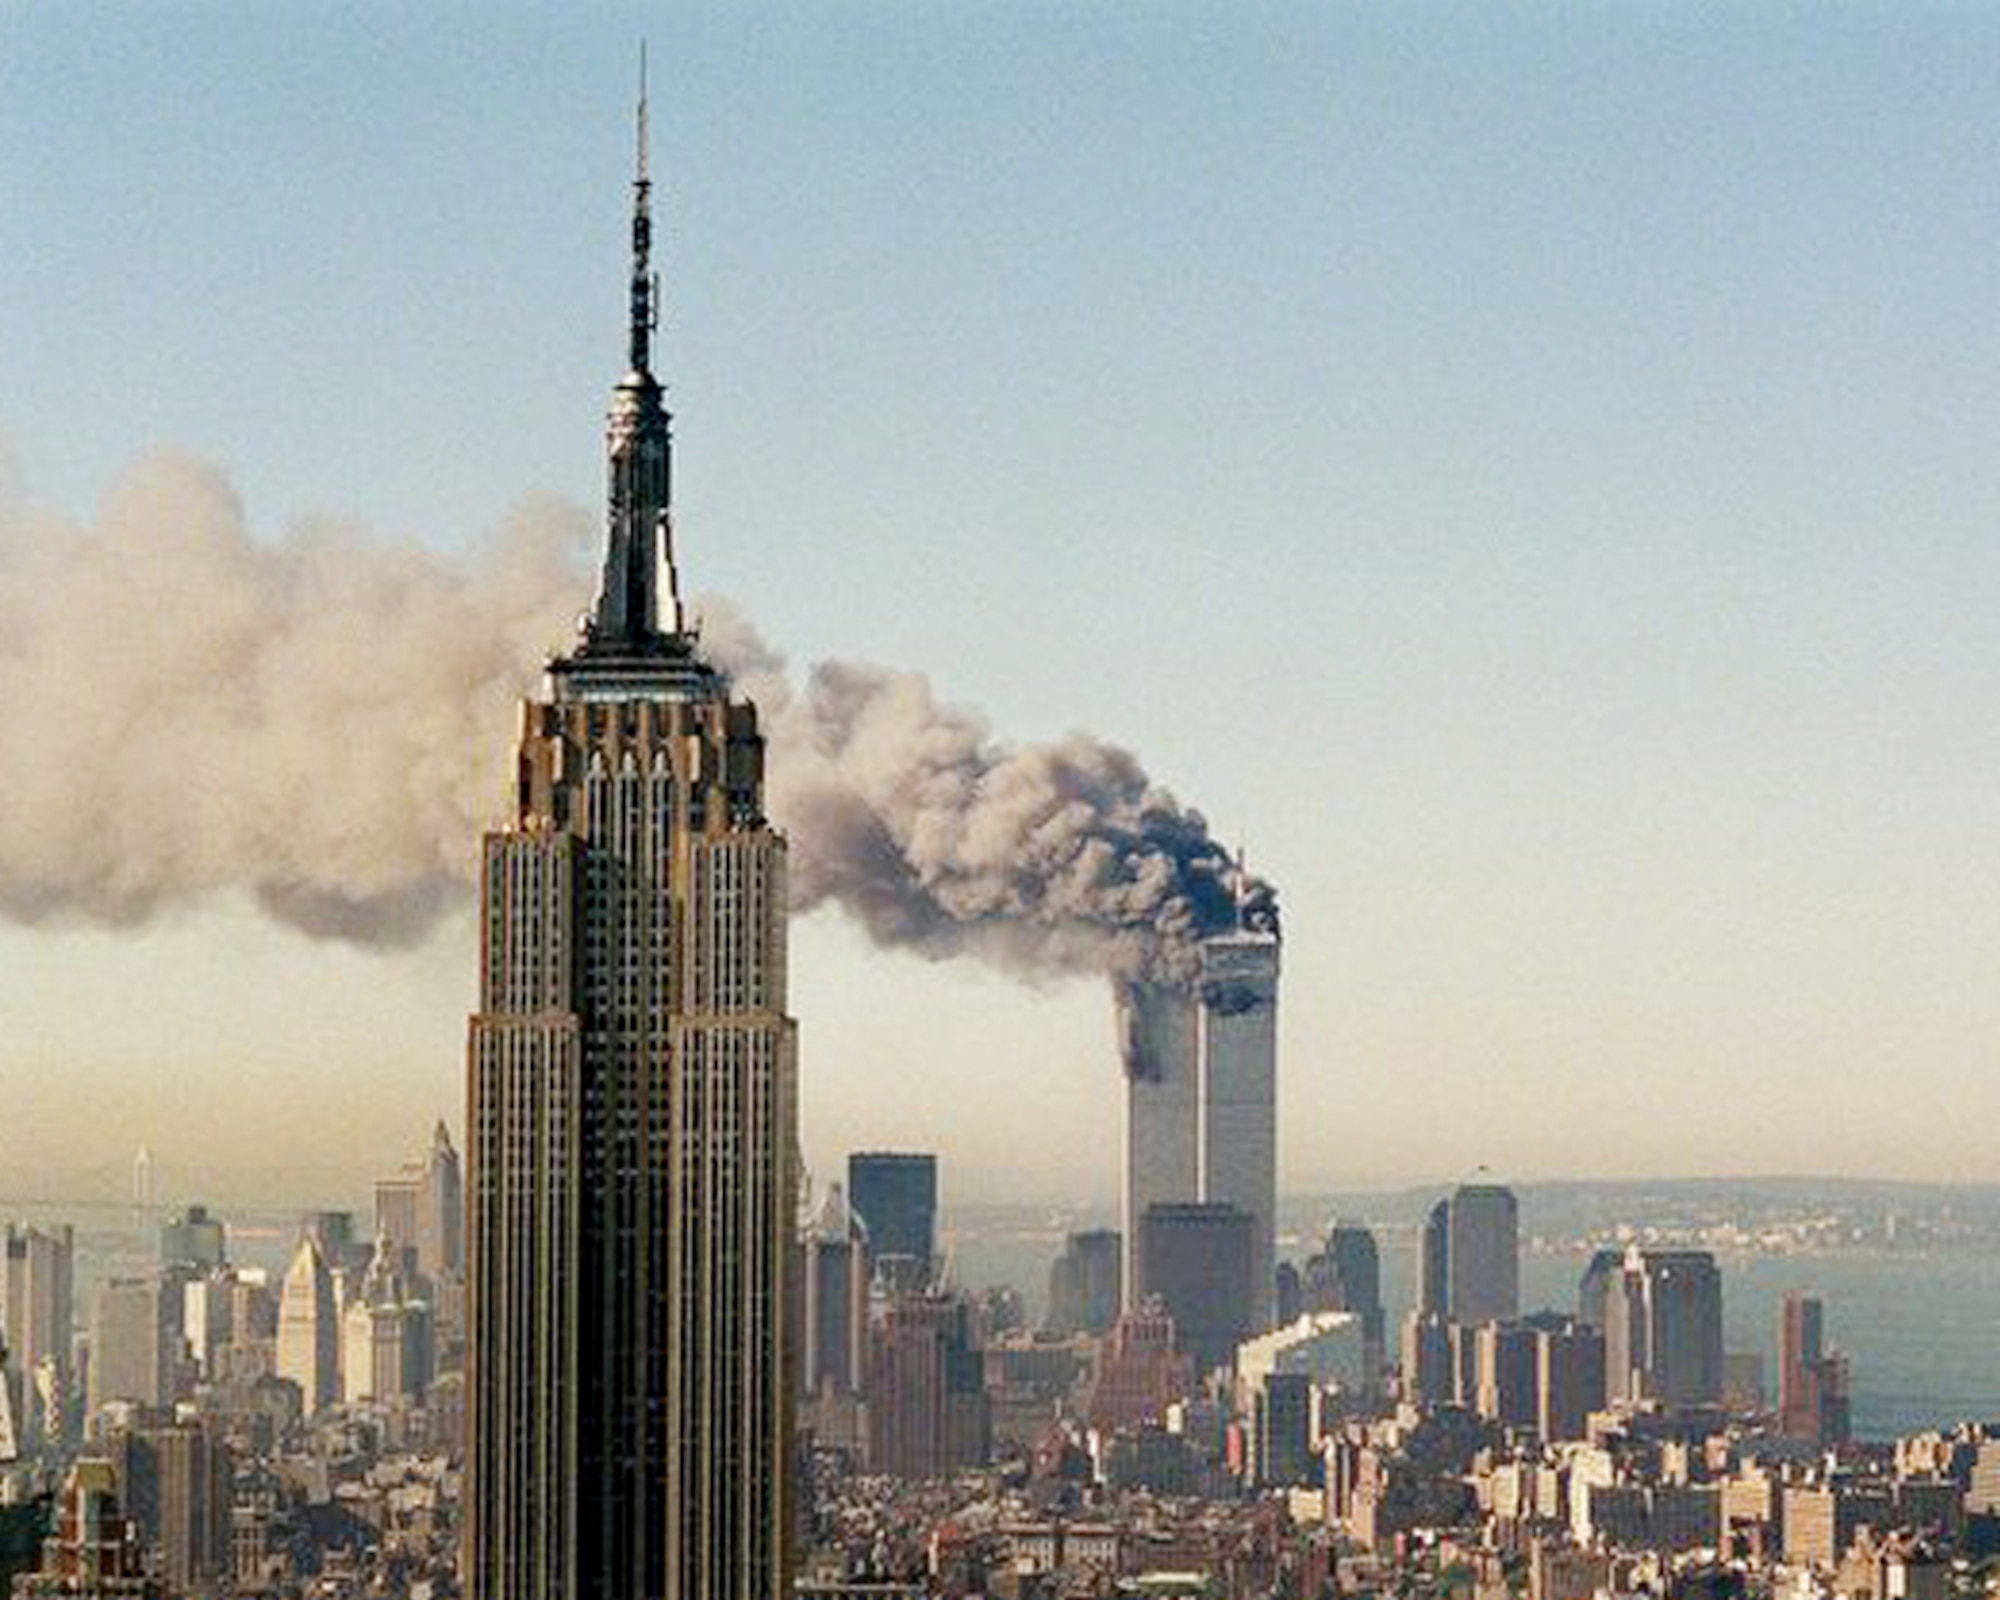 The World Trade Center burns behind New York City’s Empire State Building, Sept. 11, 2001. Both towers were attacked as a result of a highly-coordinated al-Qaida plot. (AP photo by Marty Lederhandler/Released)